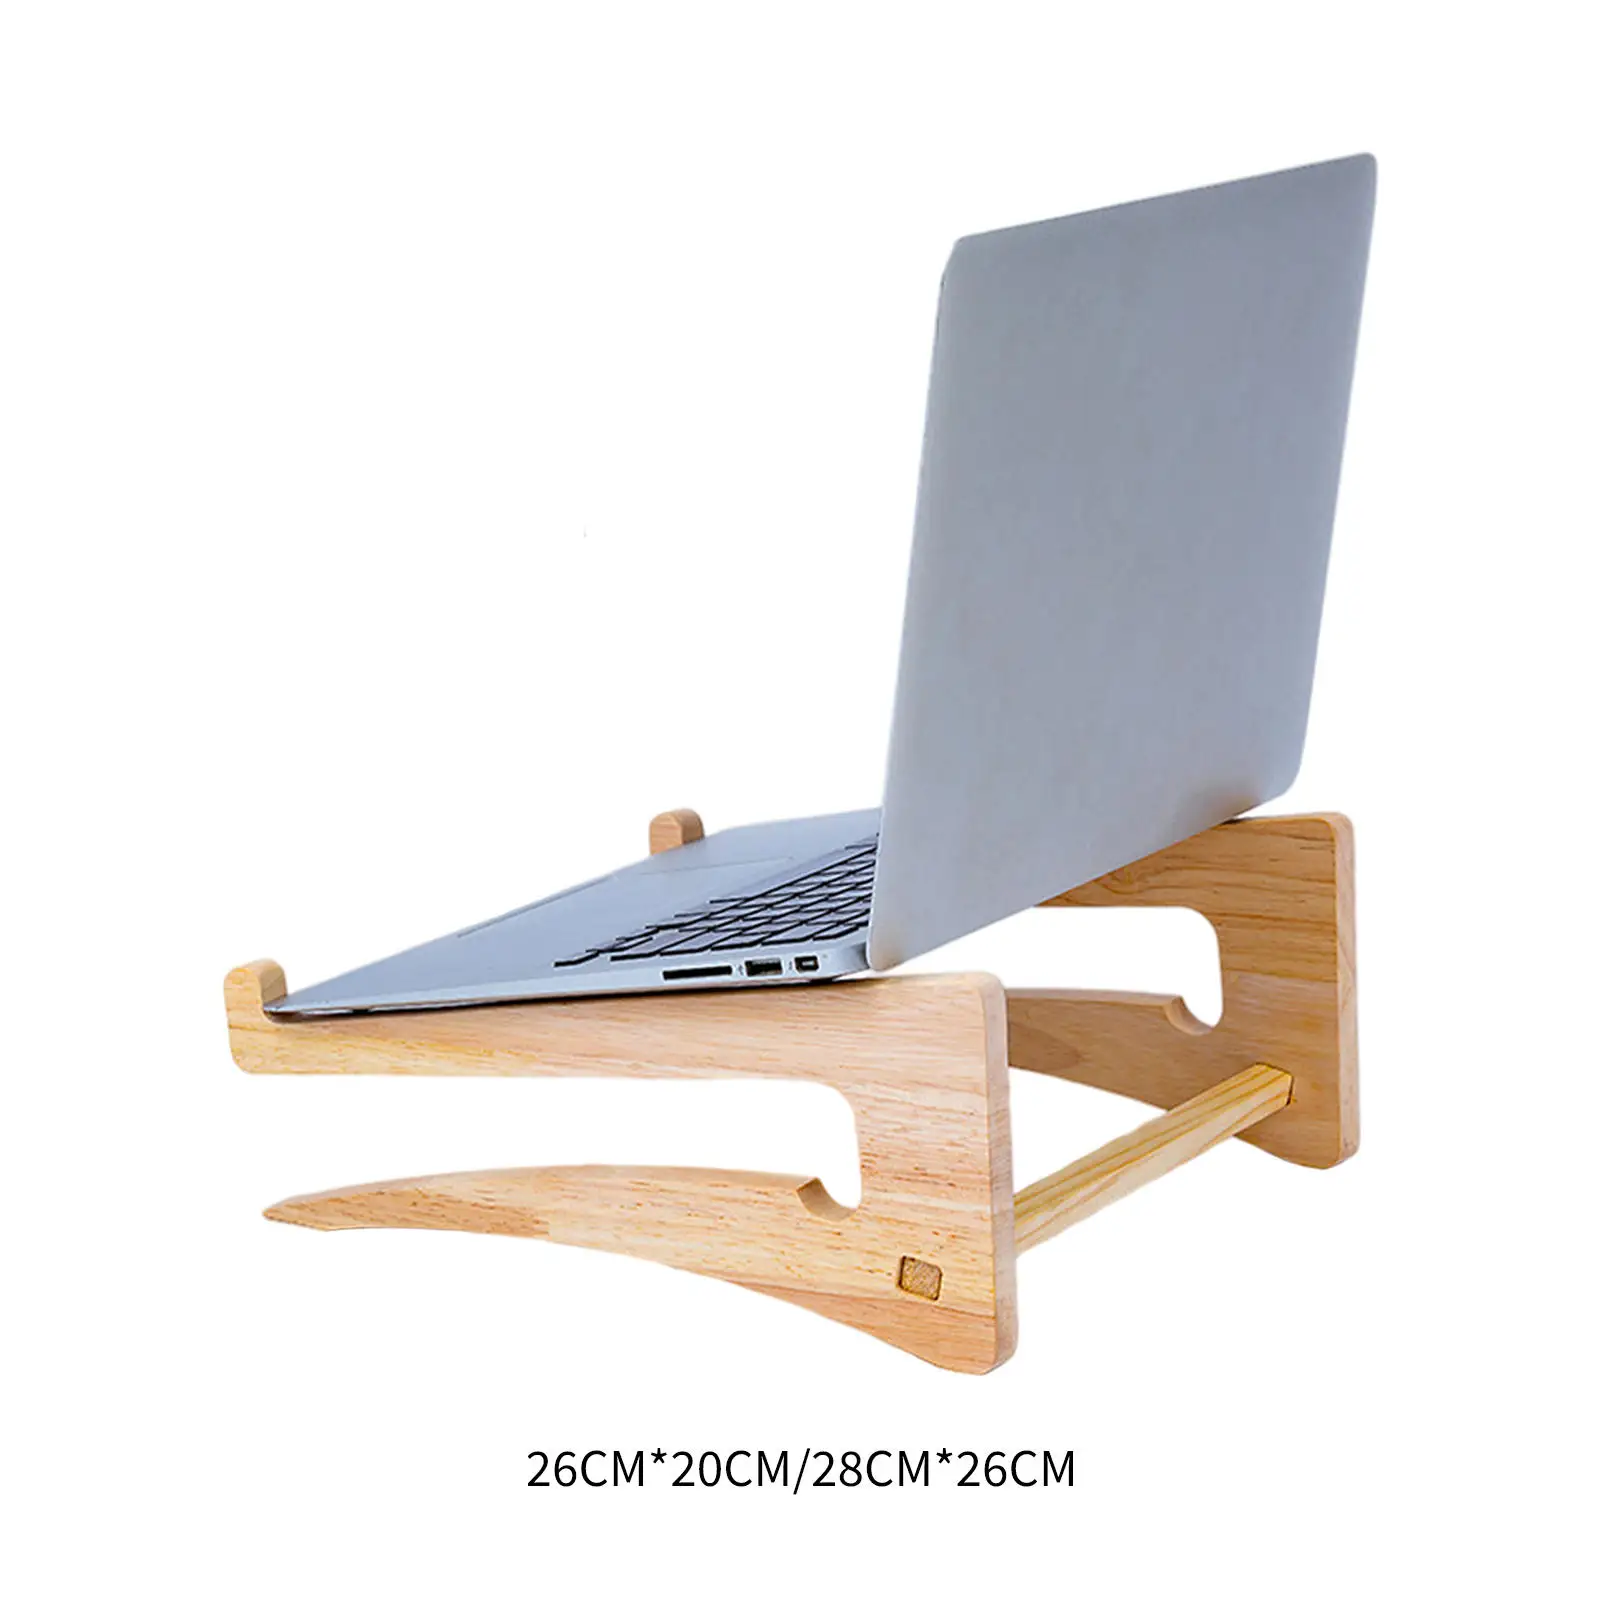 Laptop Stand Lifting Office Supplies Solid Wood Cooling Holder Computer Bracket for All Laptops Desktop Student White Collar